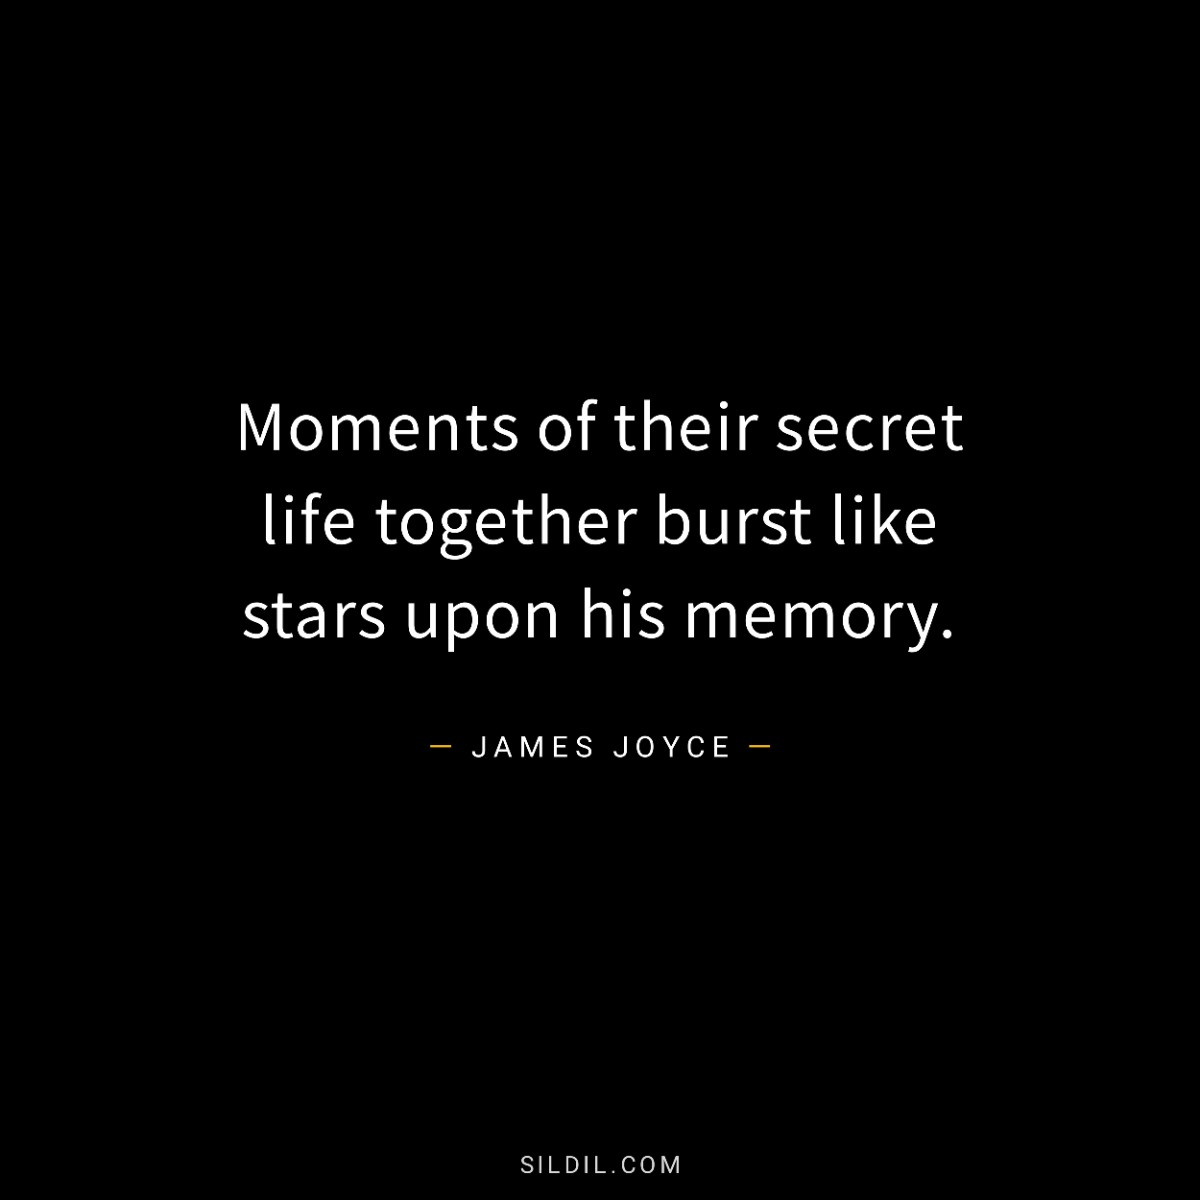 Moments of their secret life together burst like stars upon his memory.